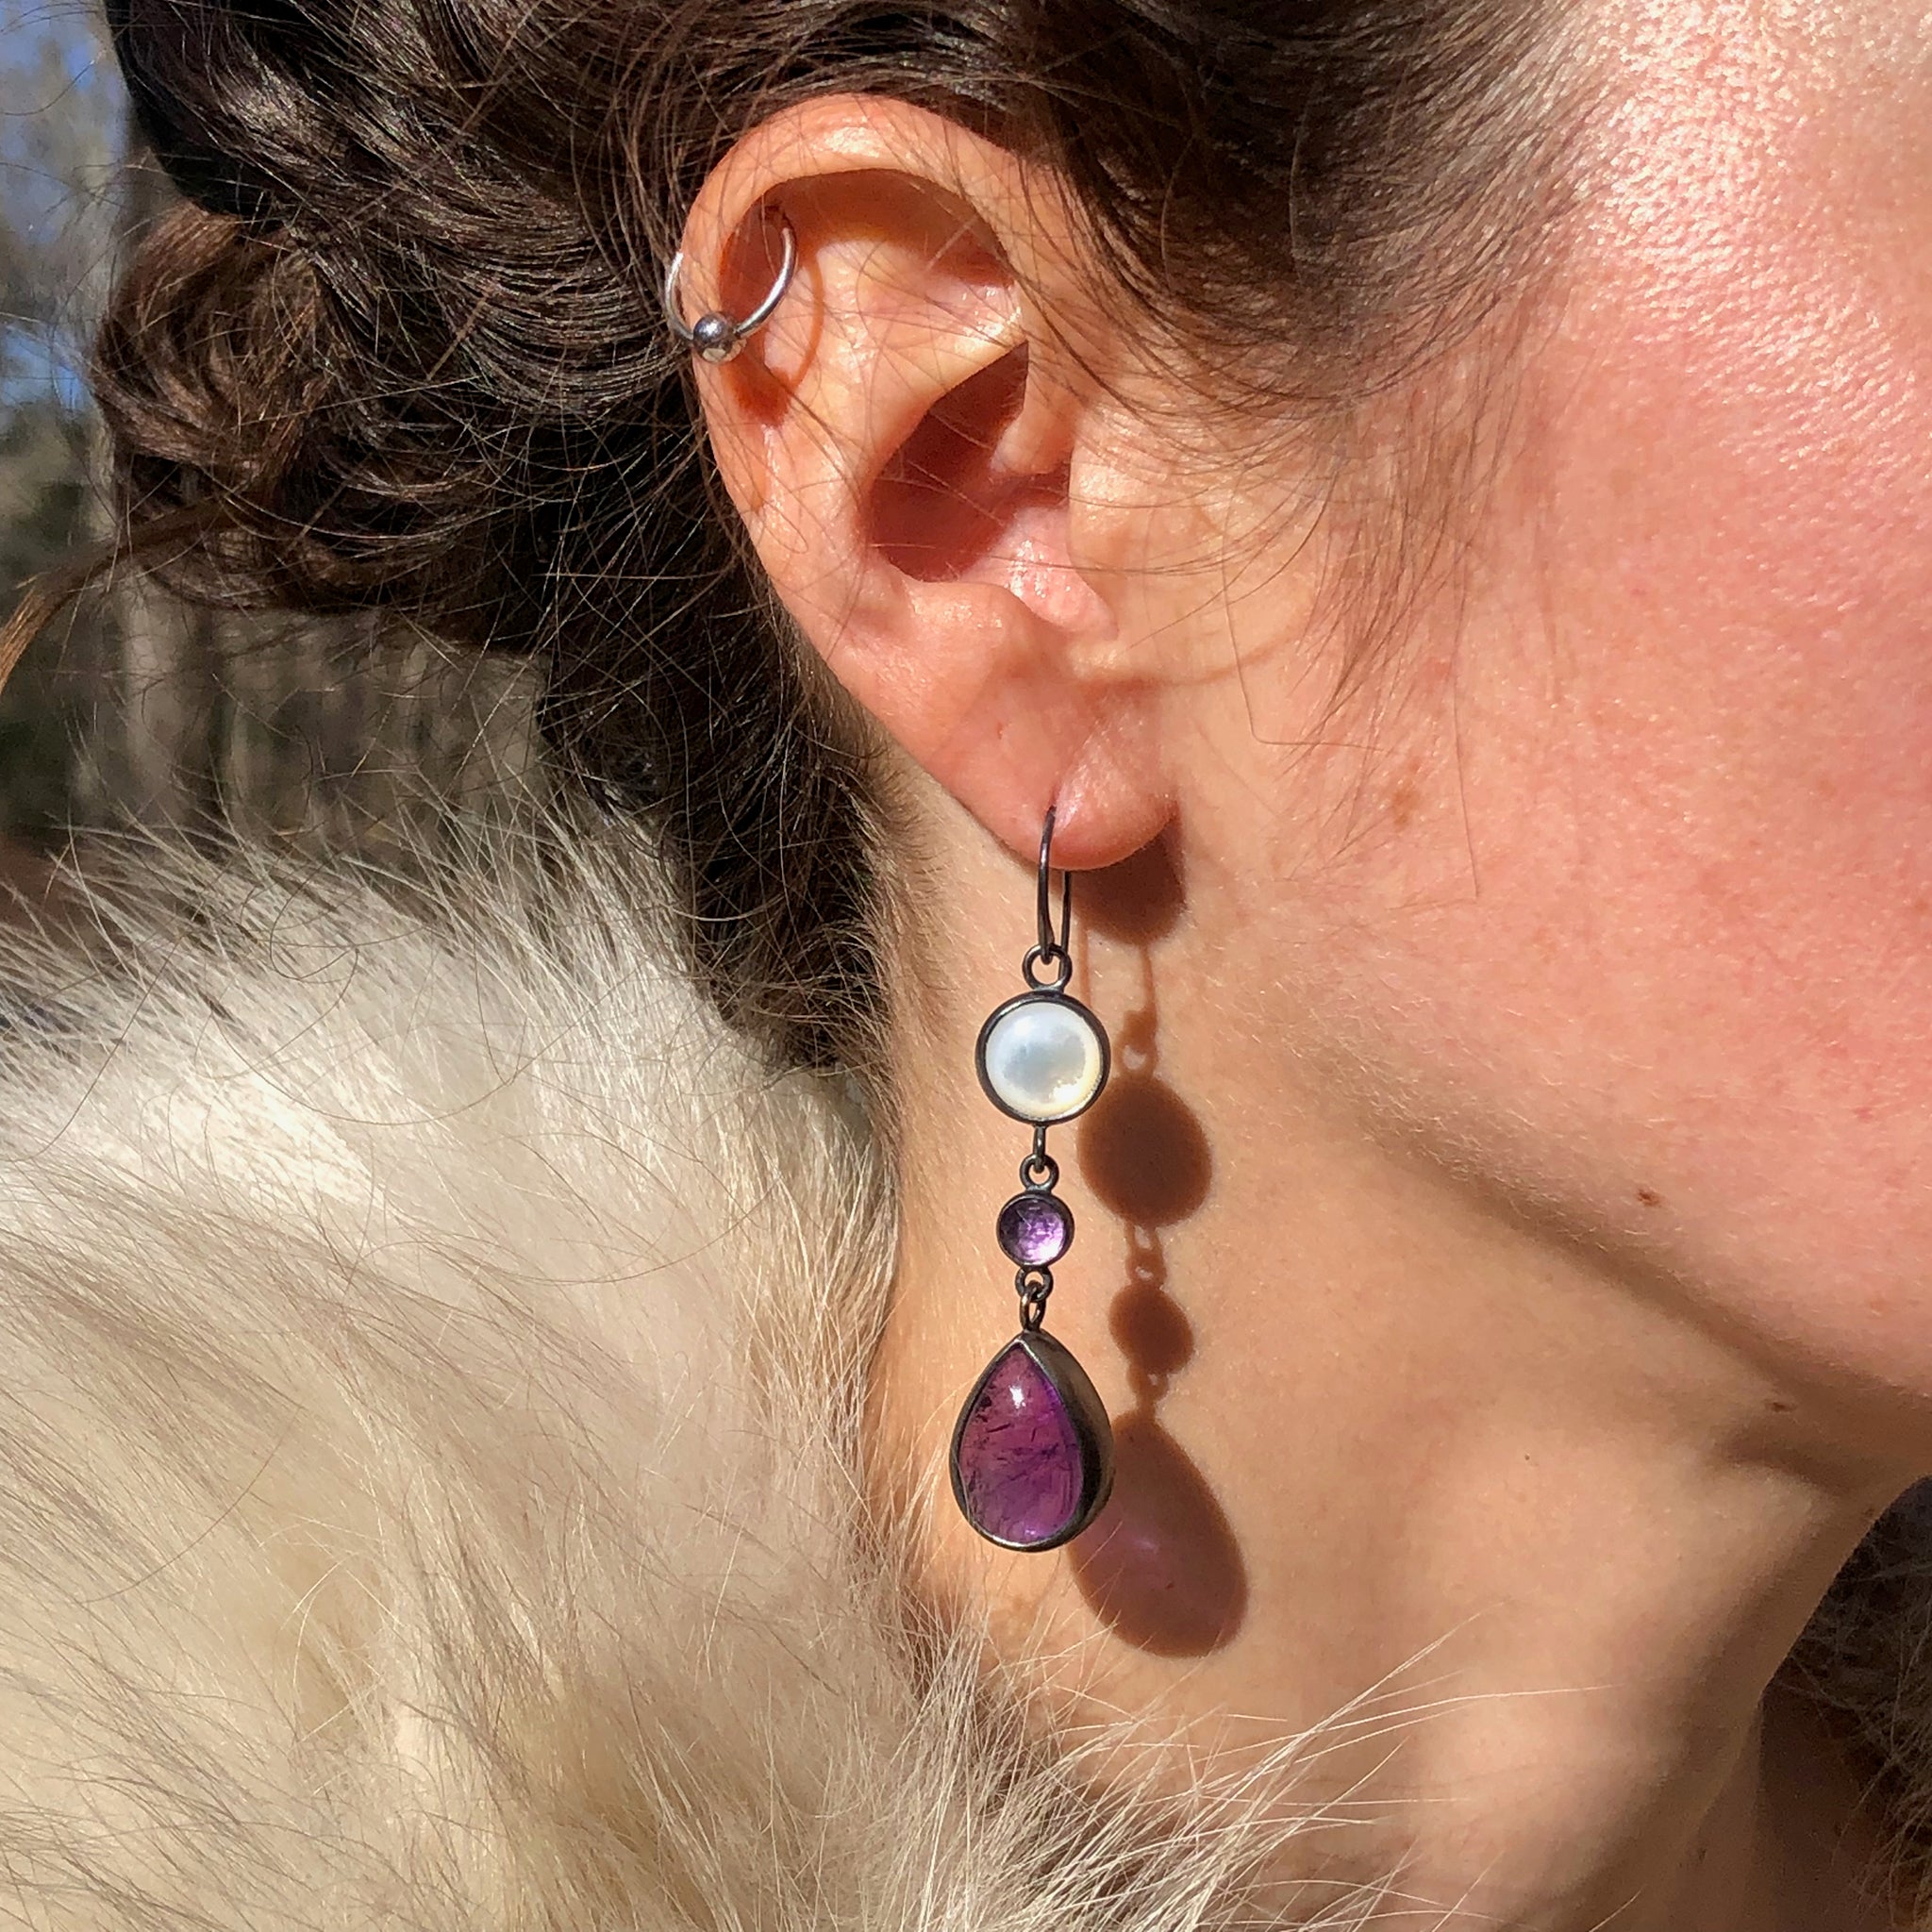 Amethyst + Mother of Pearl Dangle Earrings. "Enamored Adornments" Collection by Alex Lozier Jewelry.